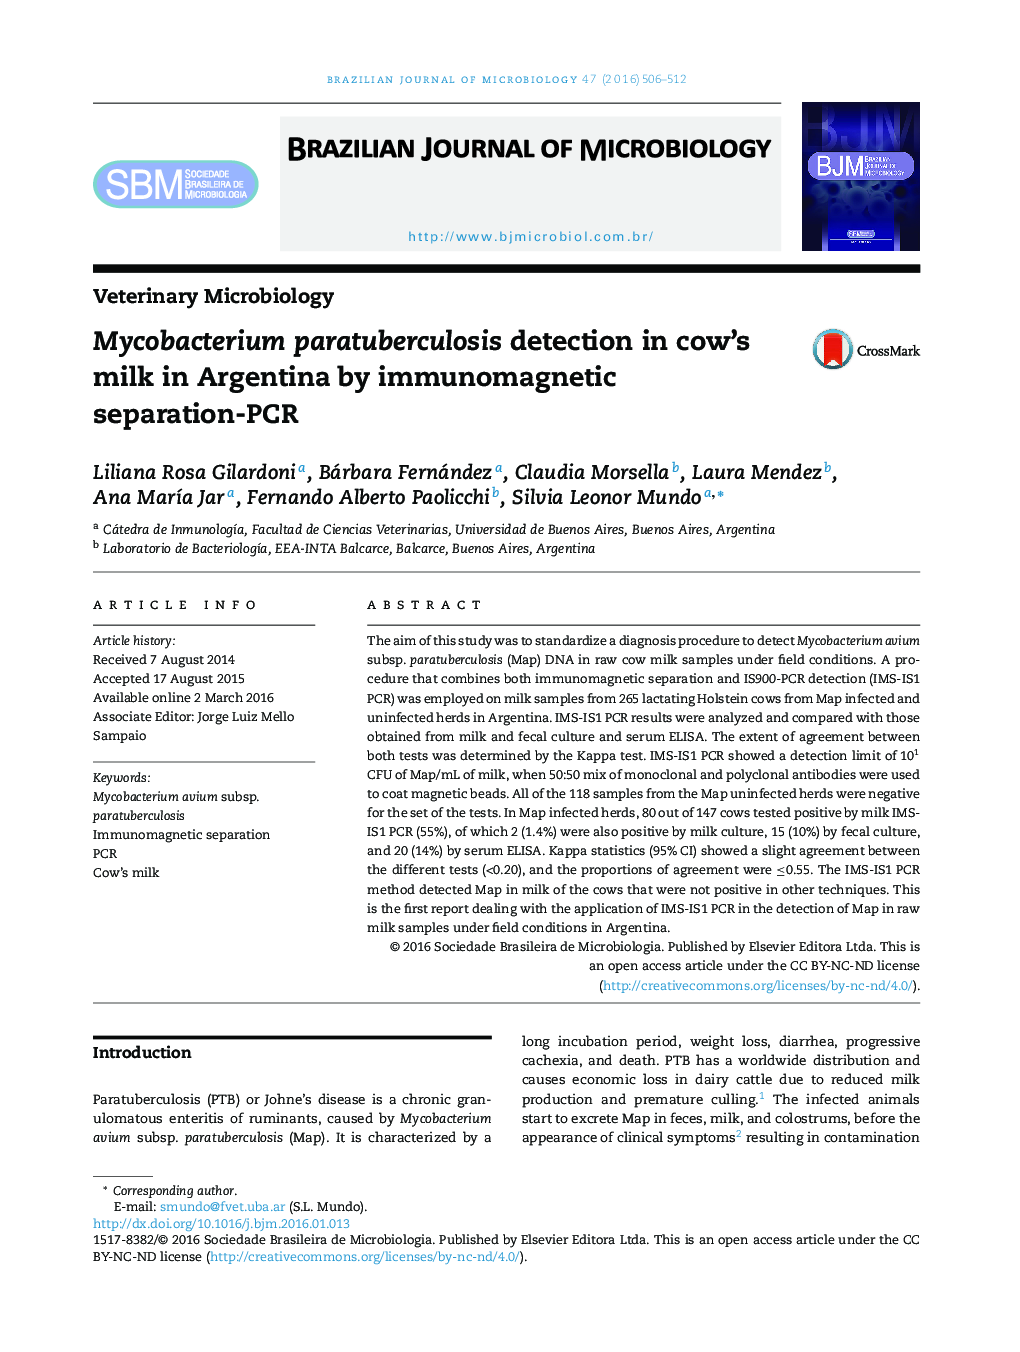 Mycobacterium paratuberculosis detection in cow's milk in Argentina by immunomagnetic separation-PCR